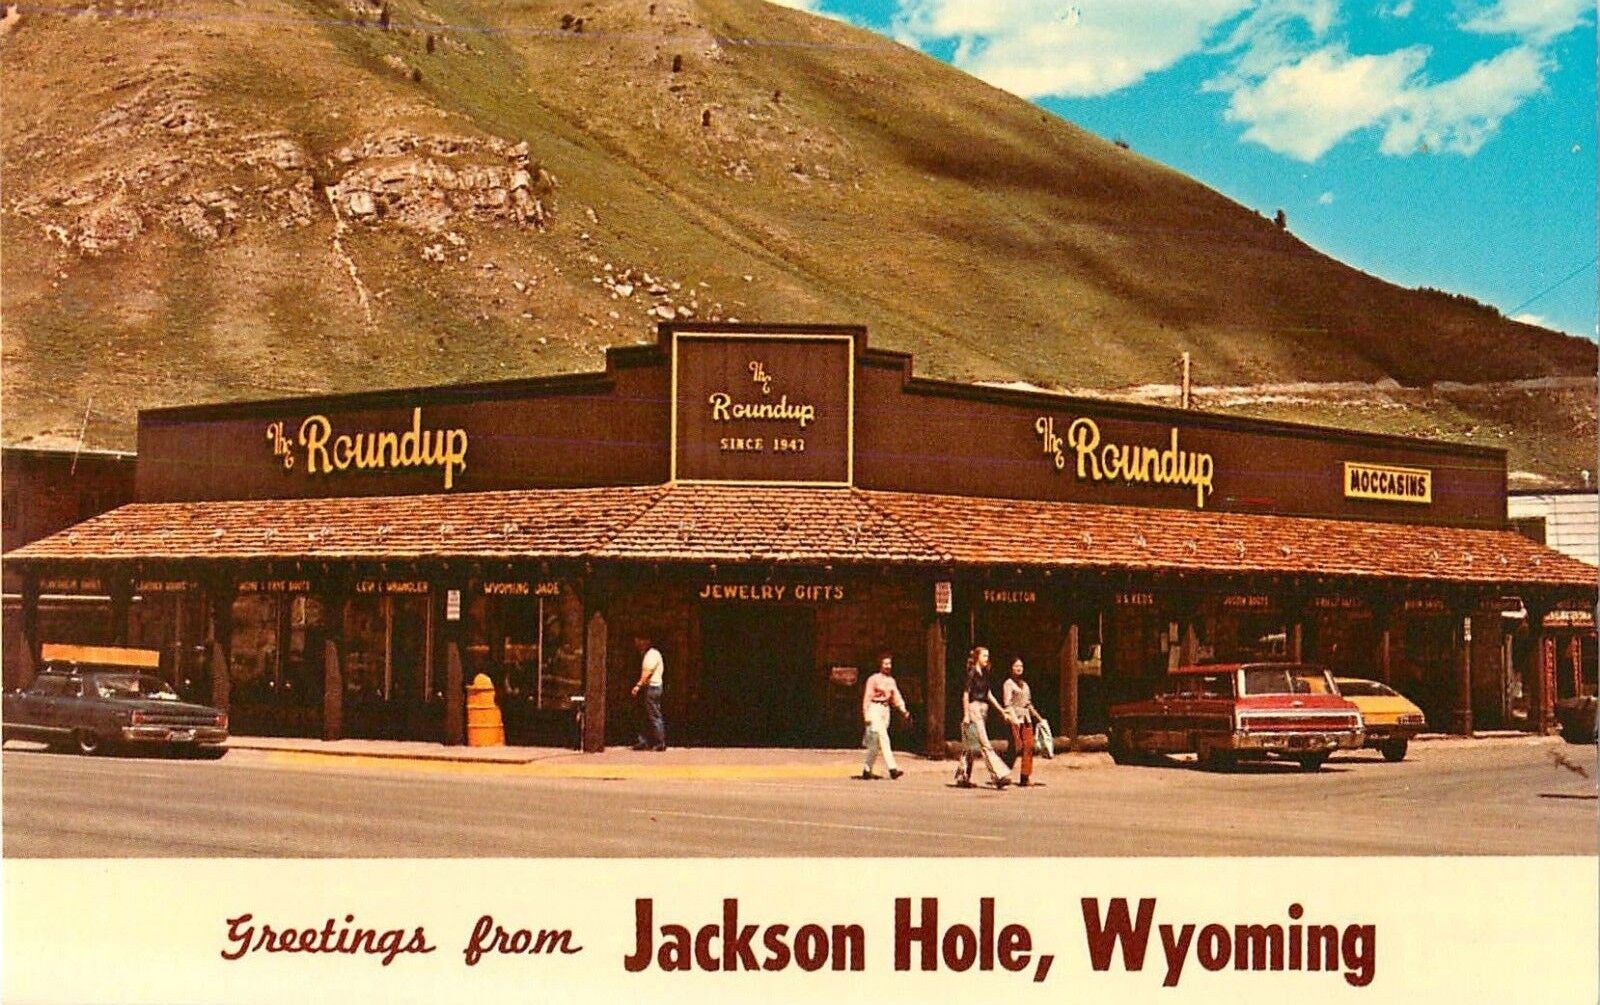 c1960s The Roundup - Western Outfitter Store, Jackson Hole, Wyoming Postcard